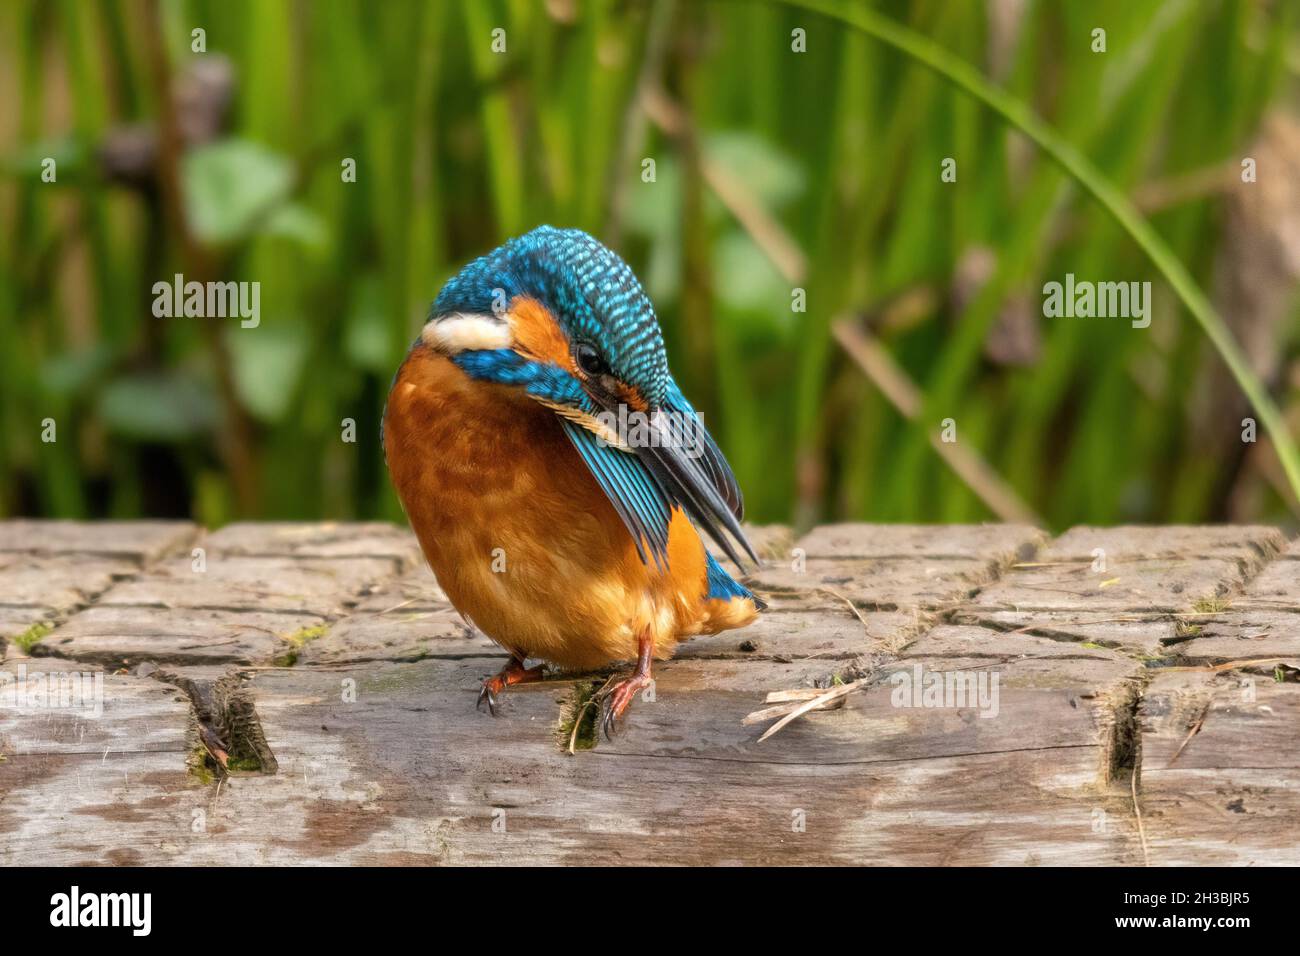 Kingfisher (Alcedo atthis), a colourful british bird, preening itself after a bath, UK Stock Photo